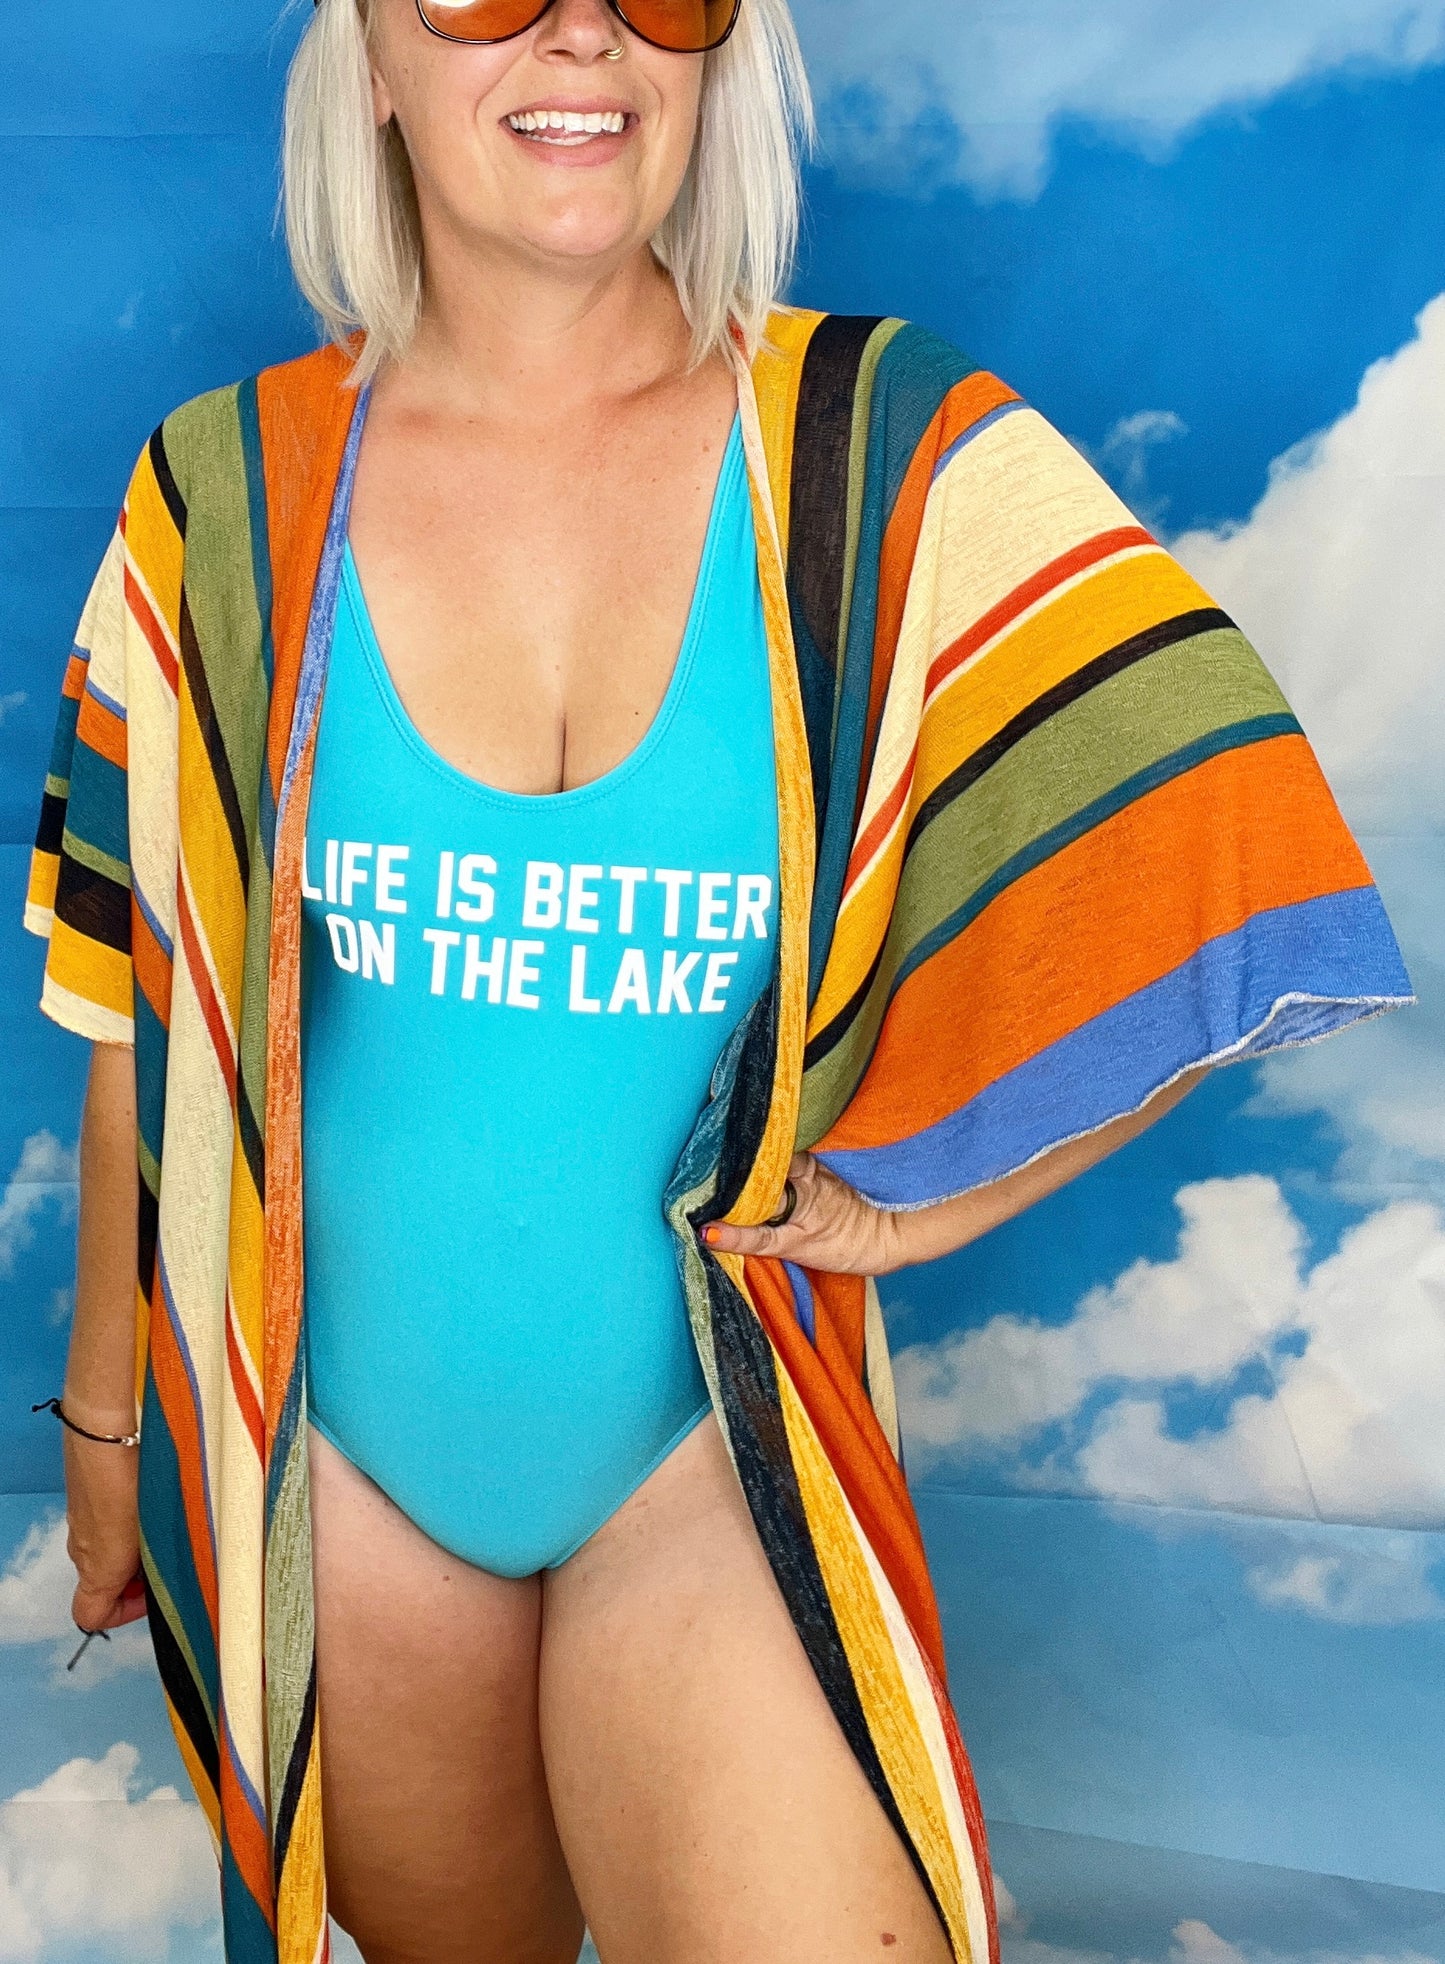 Life Is Better On The Lake Bathing Suit